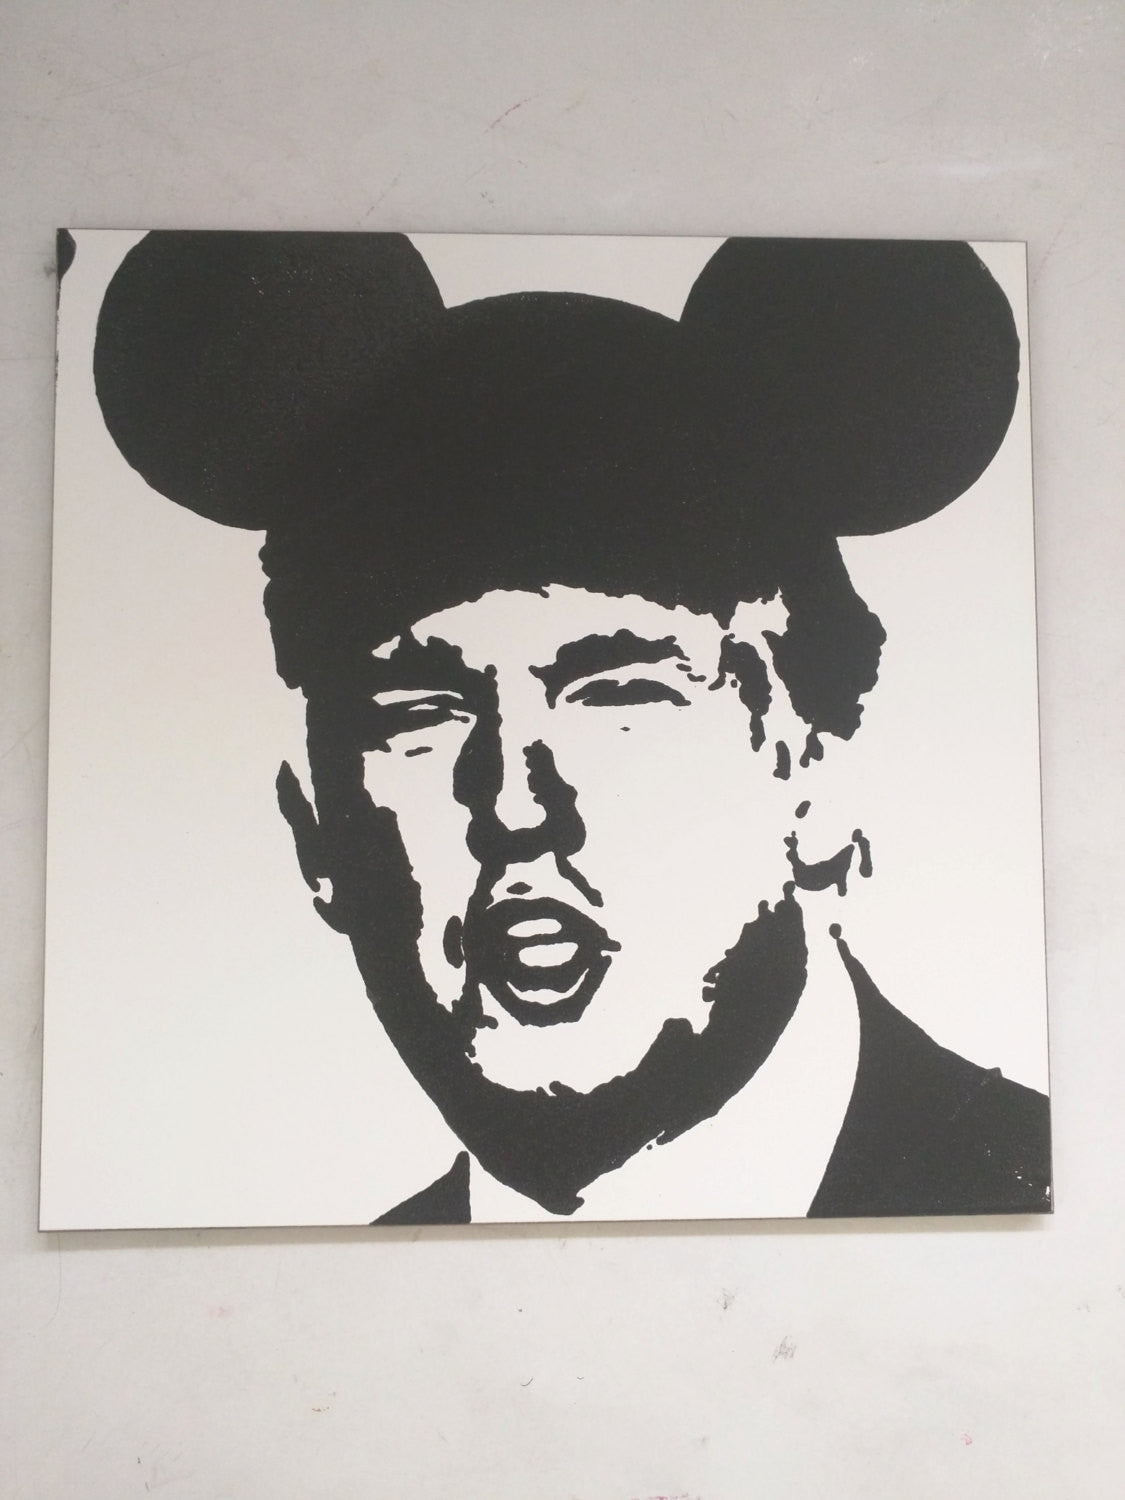 Limited Edition 1 of 150 Original Artwork "Operation Mickey Mouse" featuring Donald Trump Signed on back L3f0u 8x10